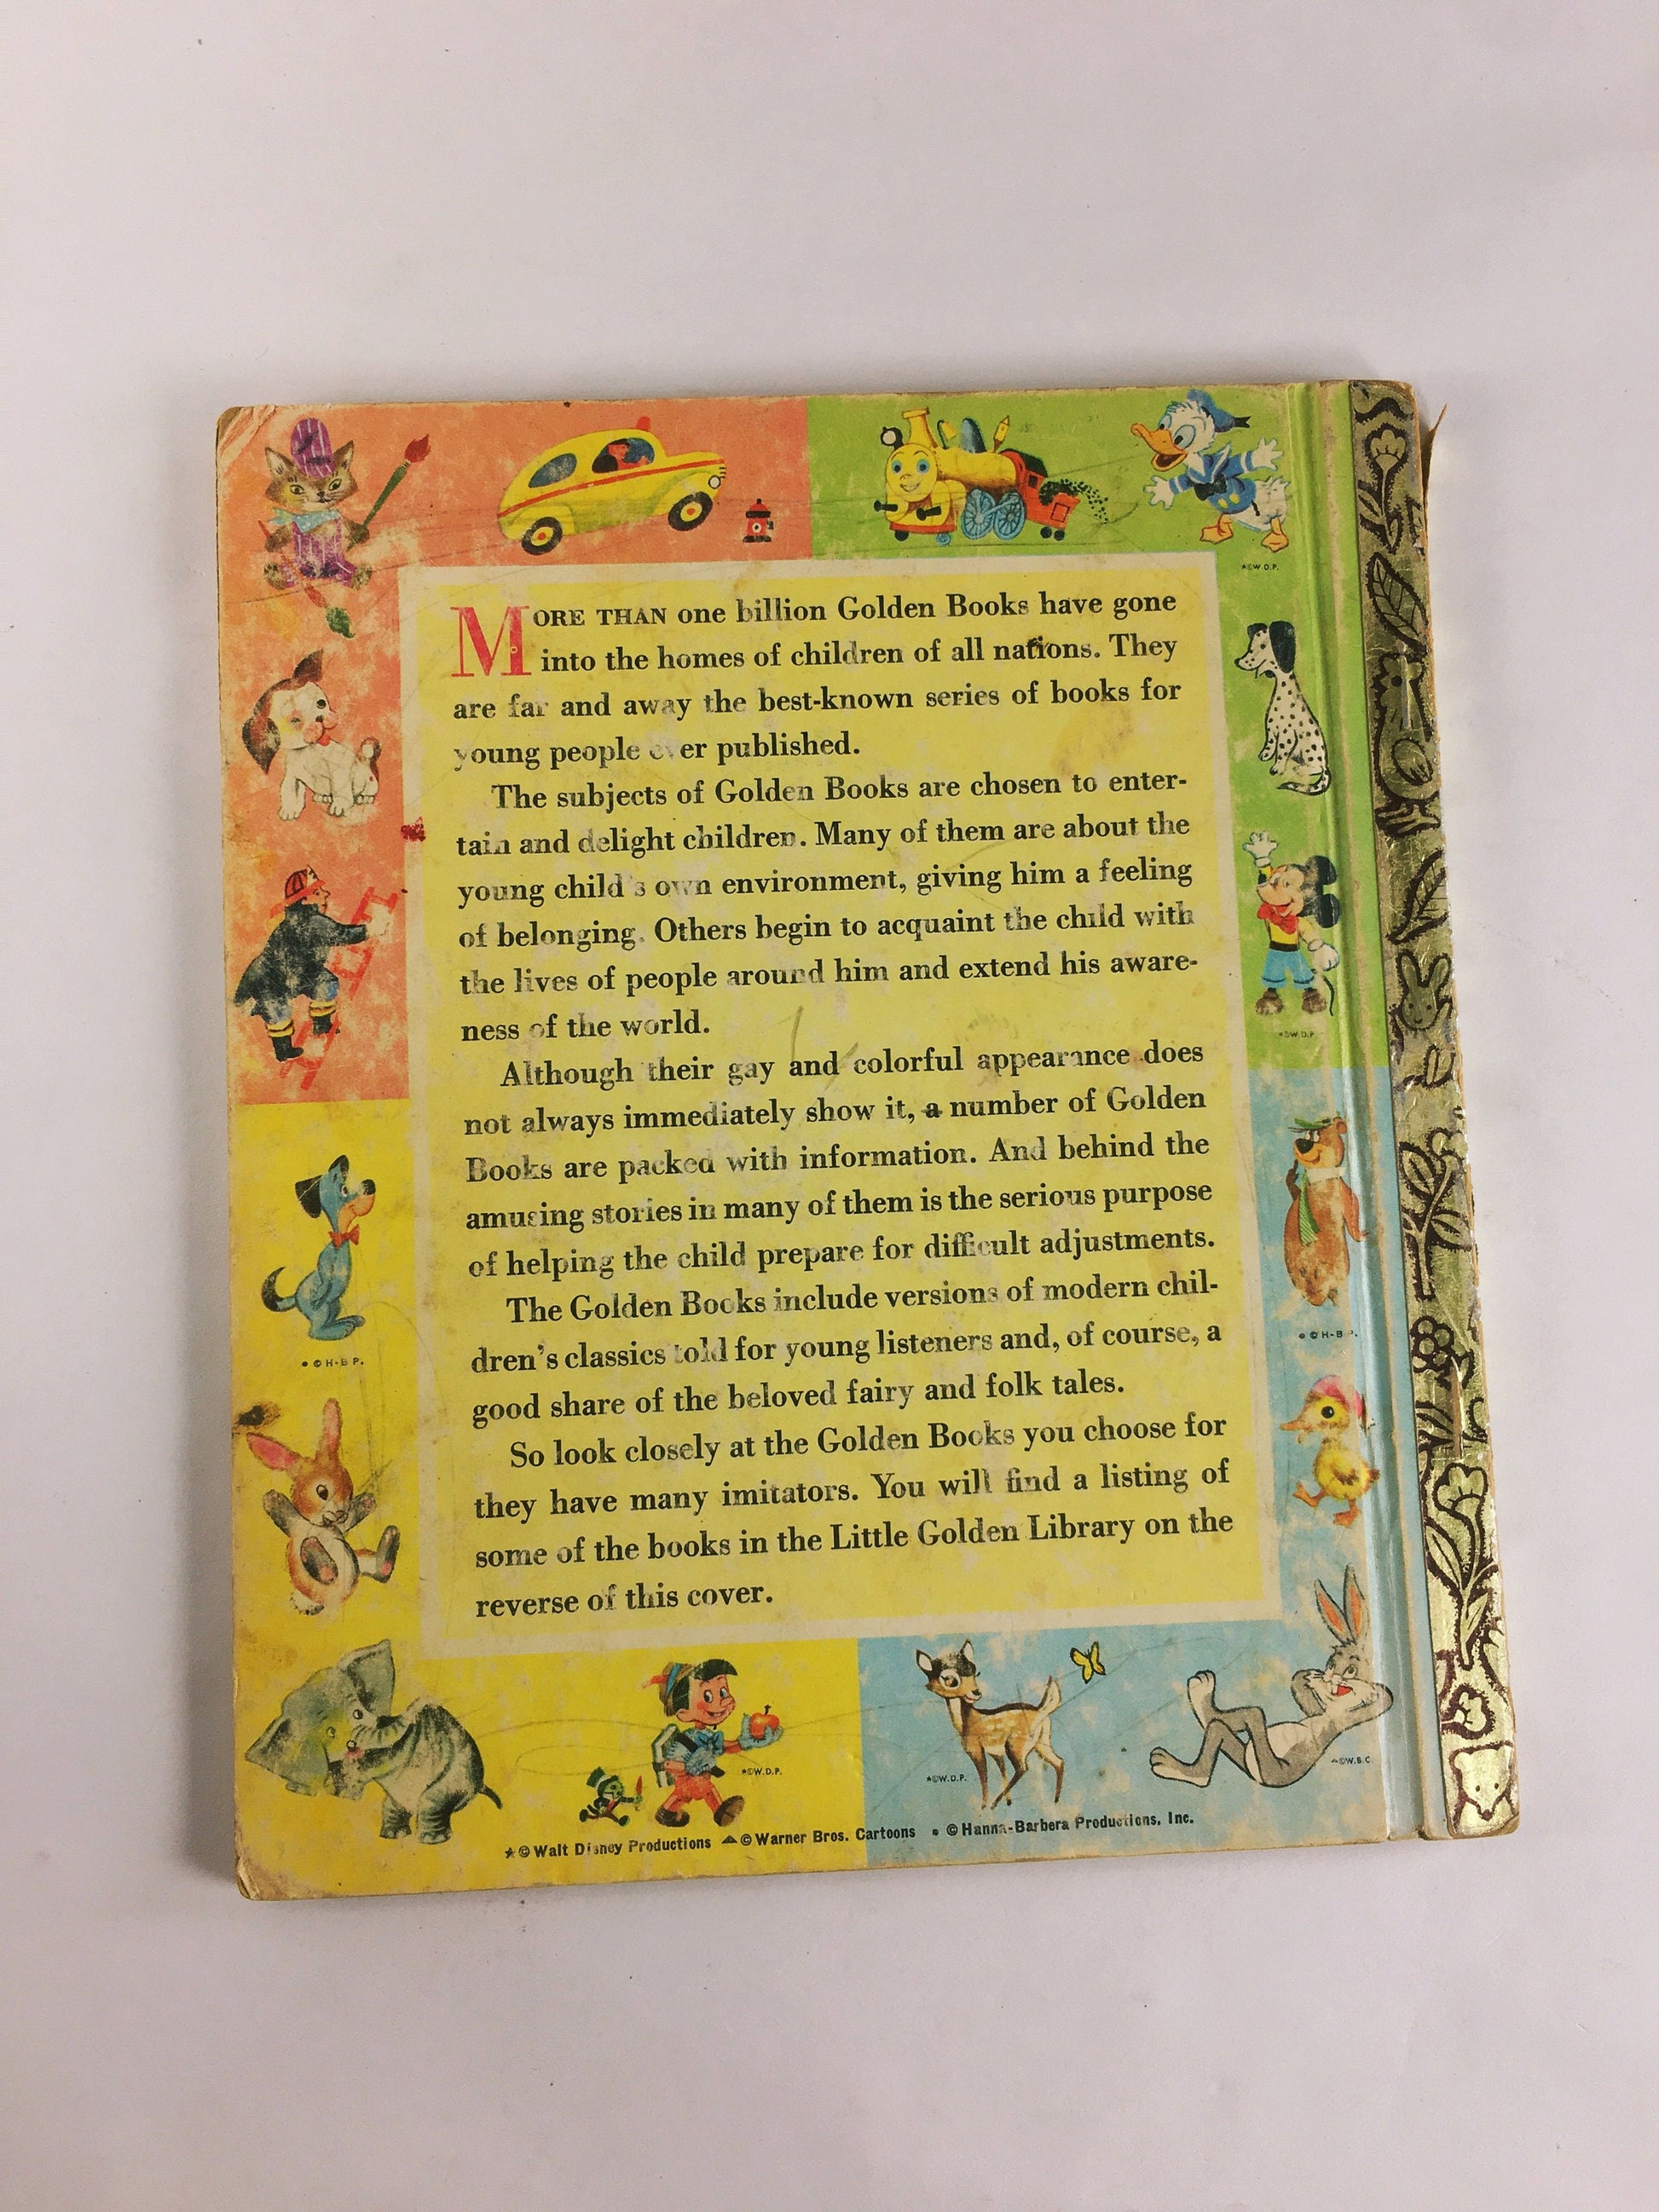 Margaret Wise Brown Home for a Bunny illustrated by Garth Williams. Little Golden Book circa 1961 vintage early printing.